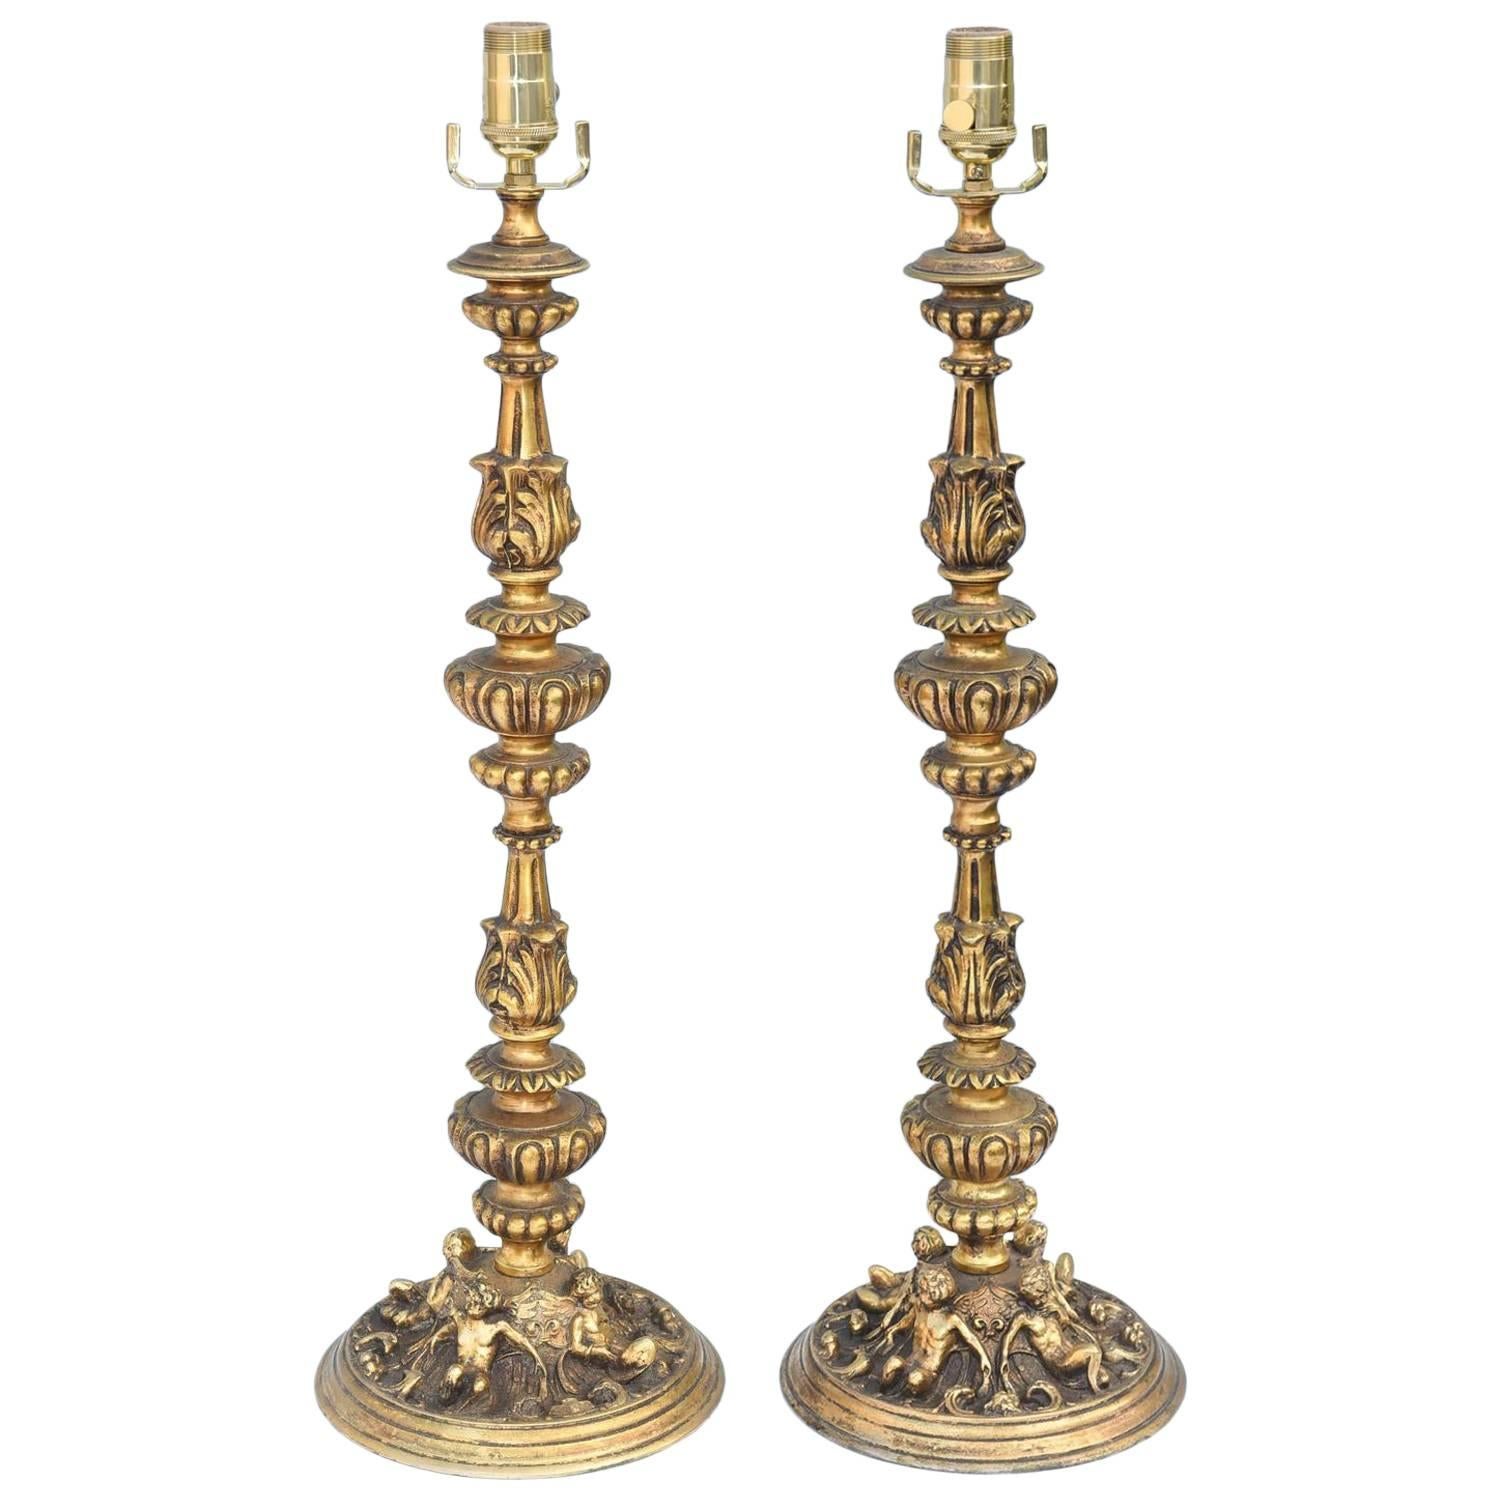 Pair of 19th Century French Bronze Dore Lamped Candlesticks